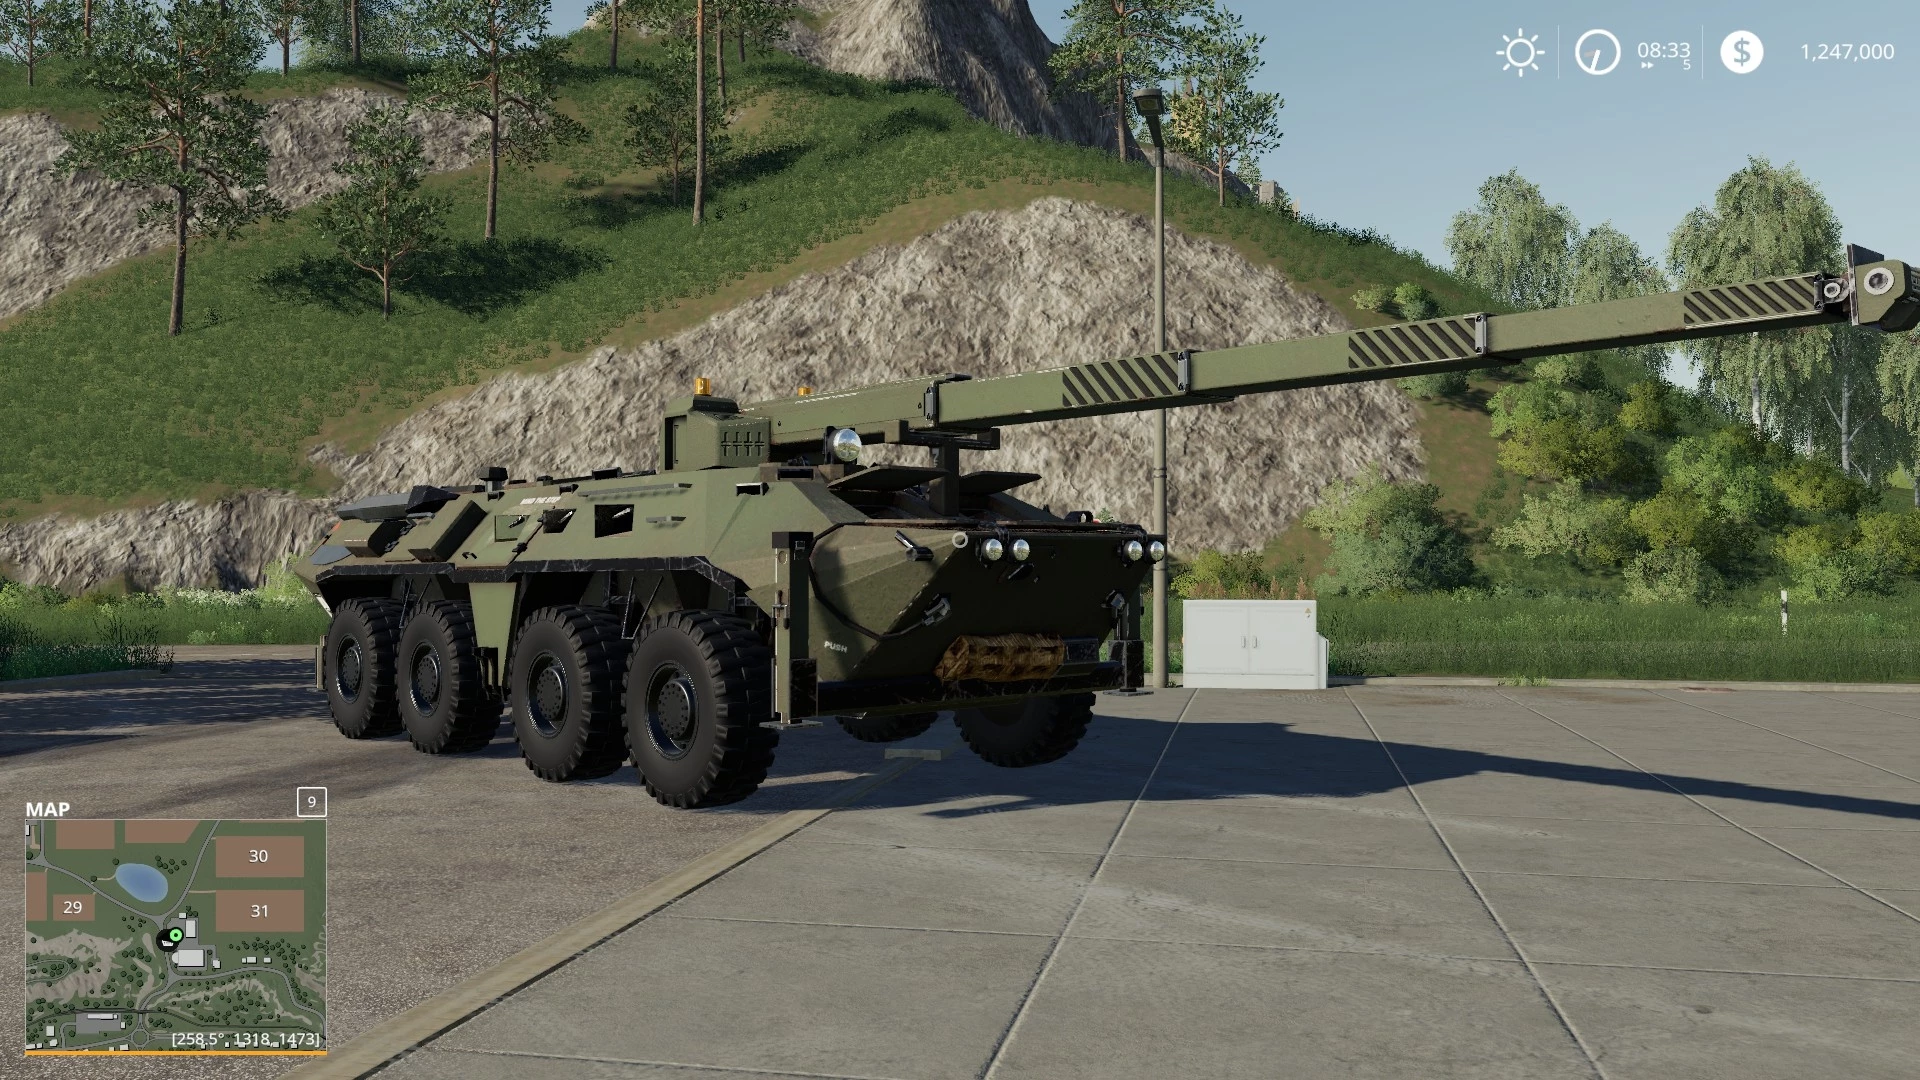 M89 RECOVERY VEHICLE V1.0